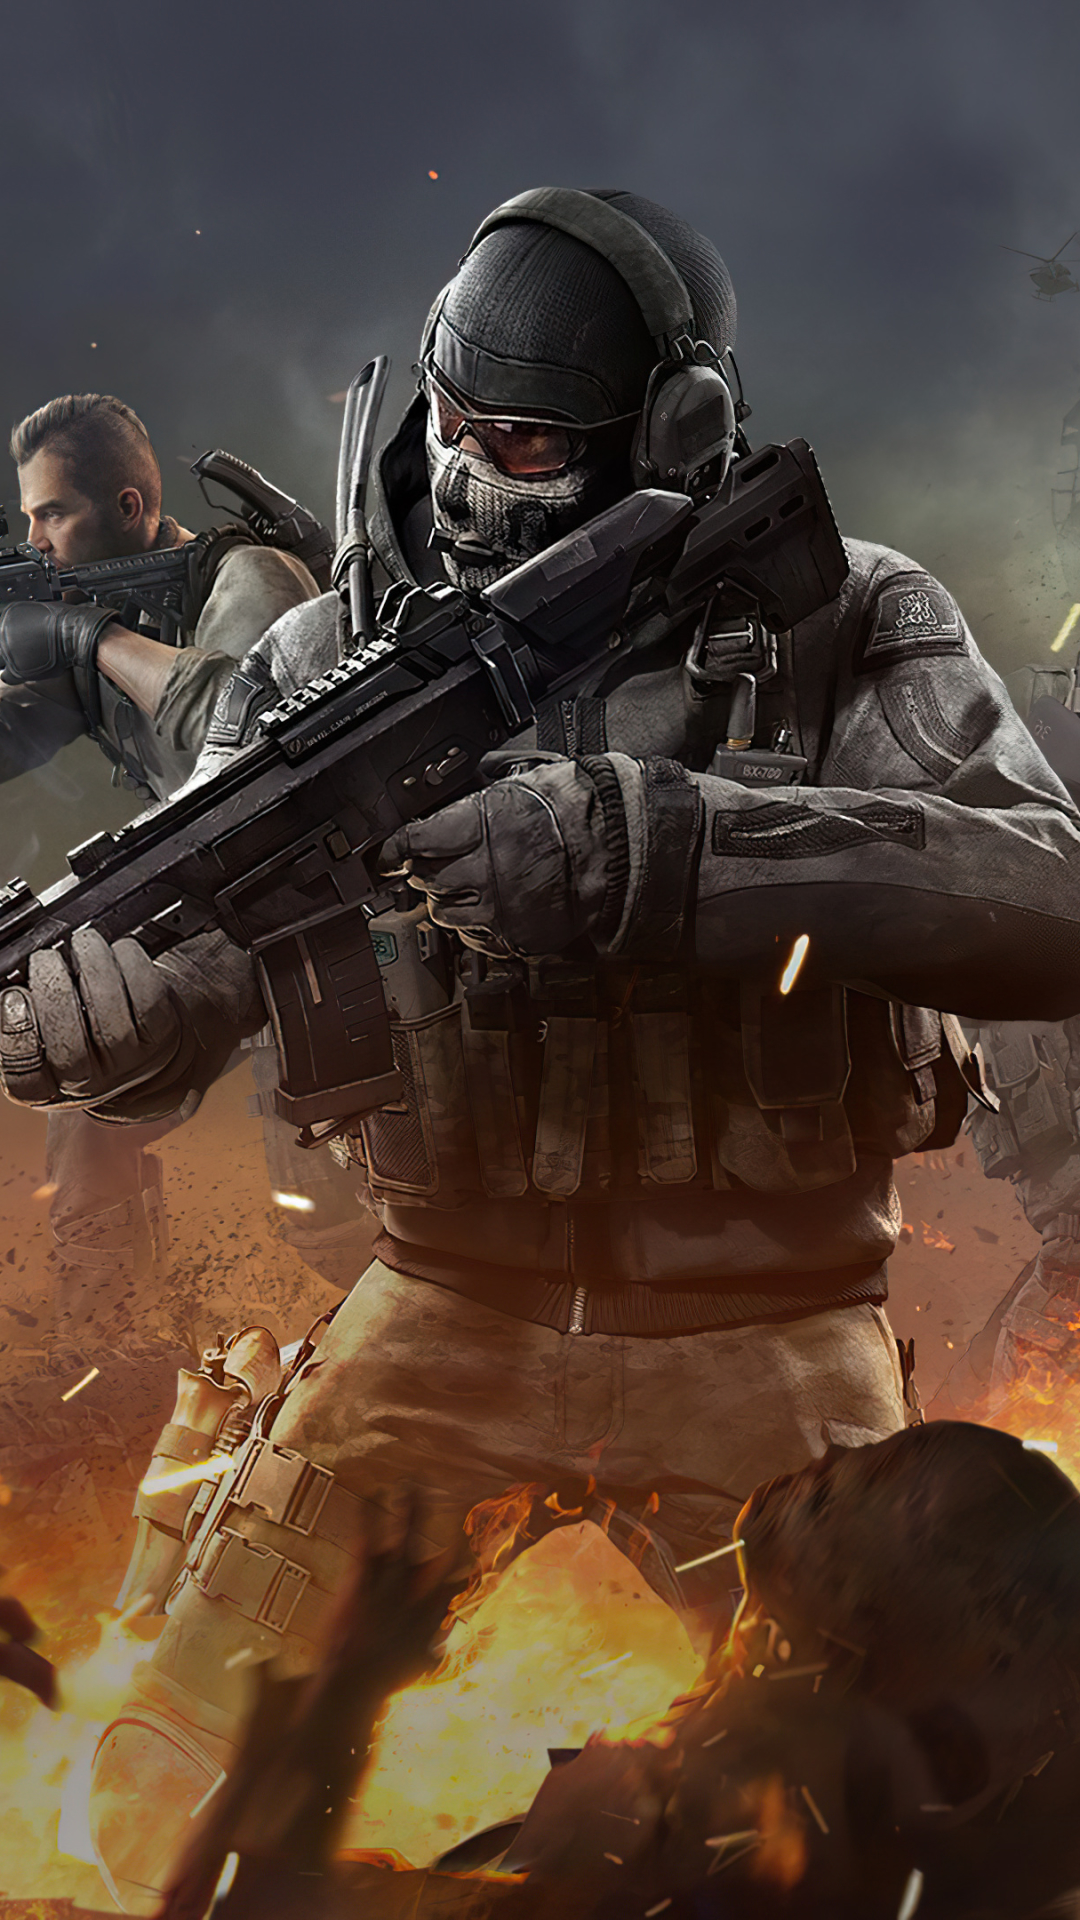 call of duty: mobile, video game